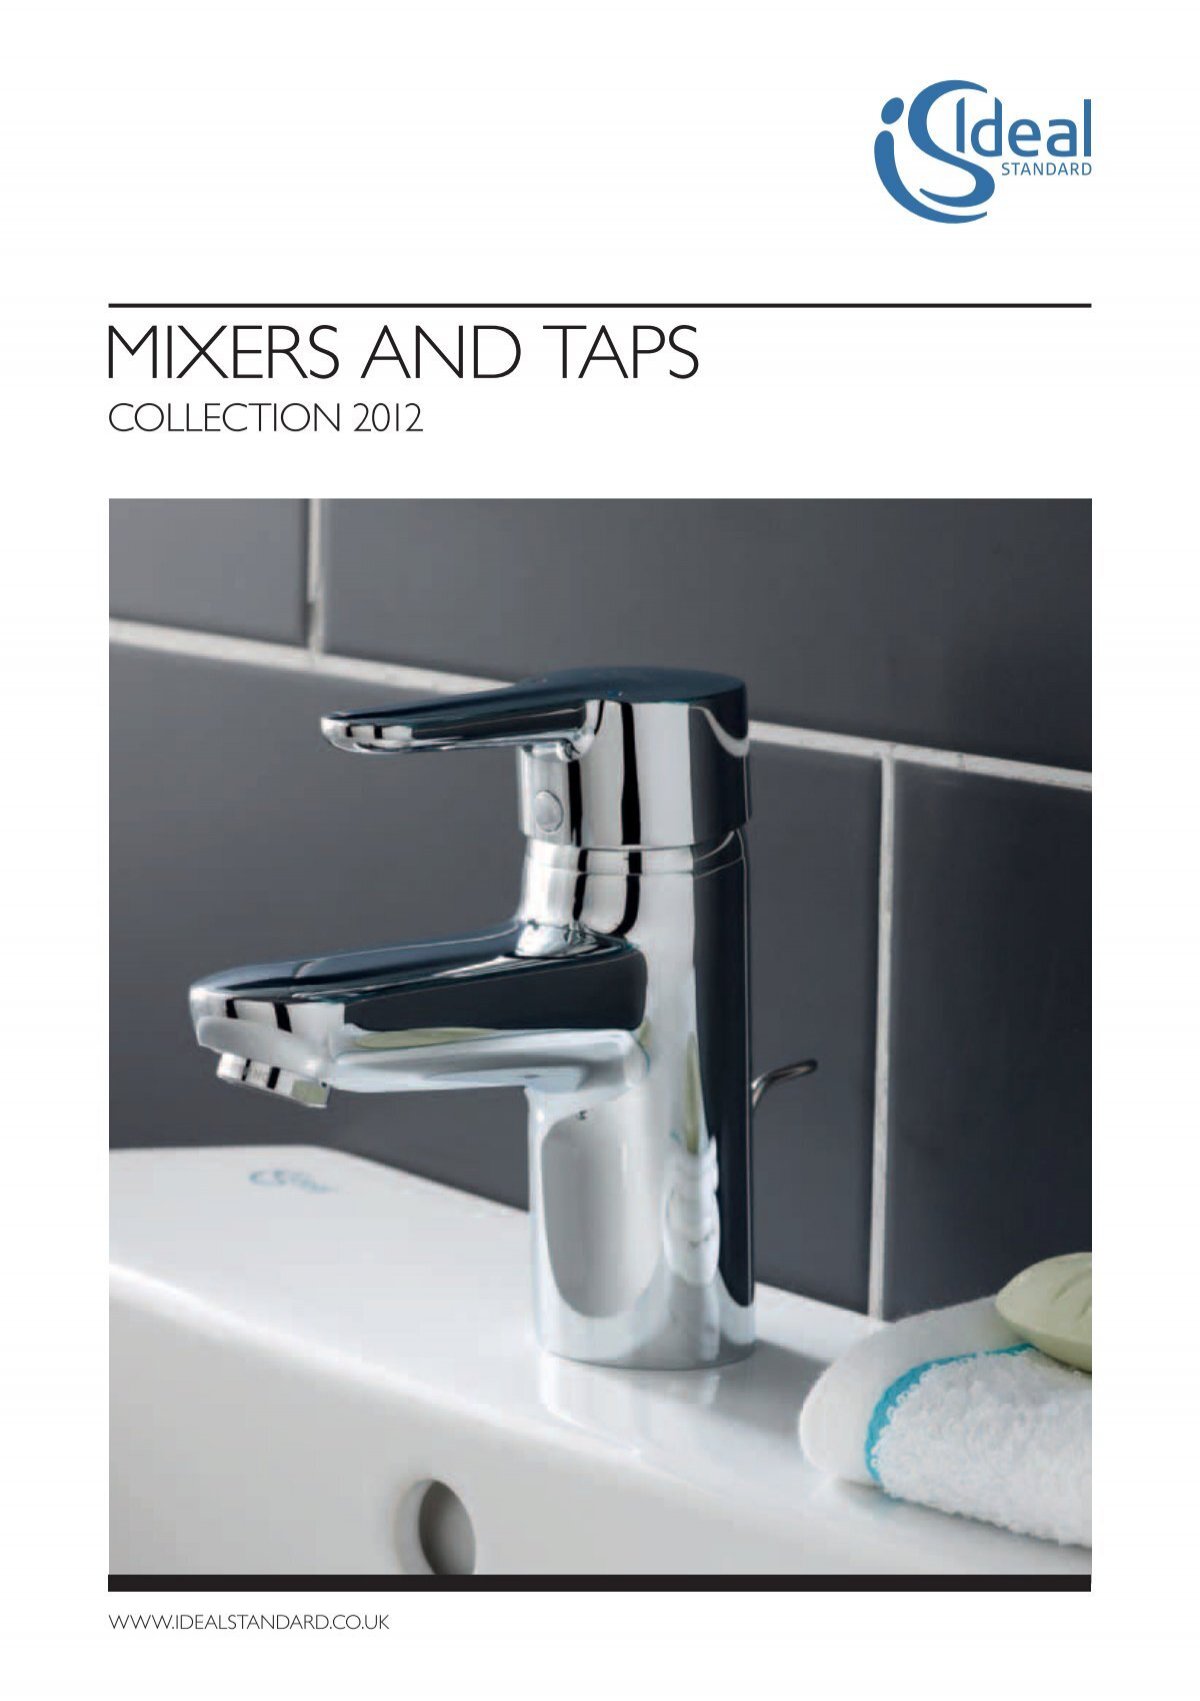 Lejlighedsvis Encyclopedia Forbipasserende Mixers and Taps Brochure 2012 When you're ... - Ideal Standard